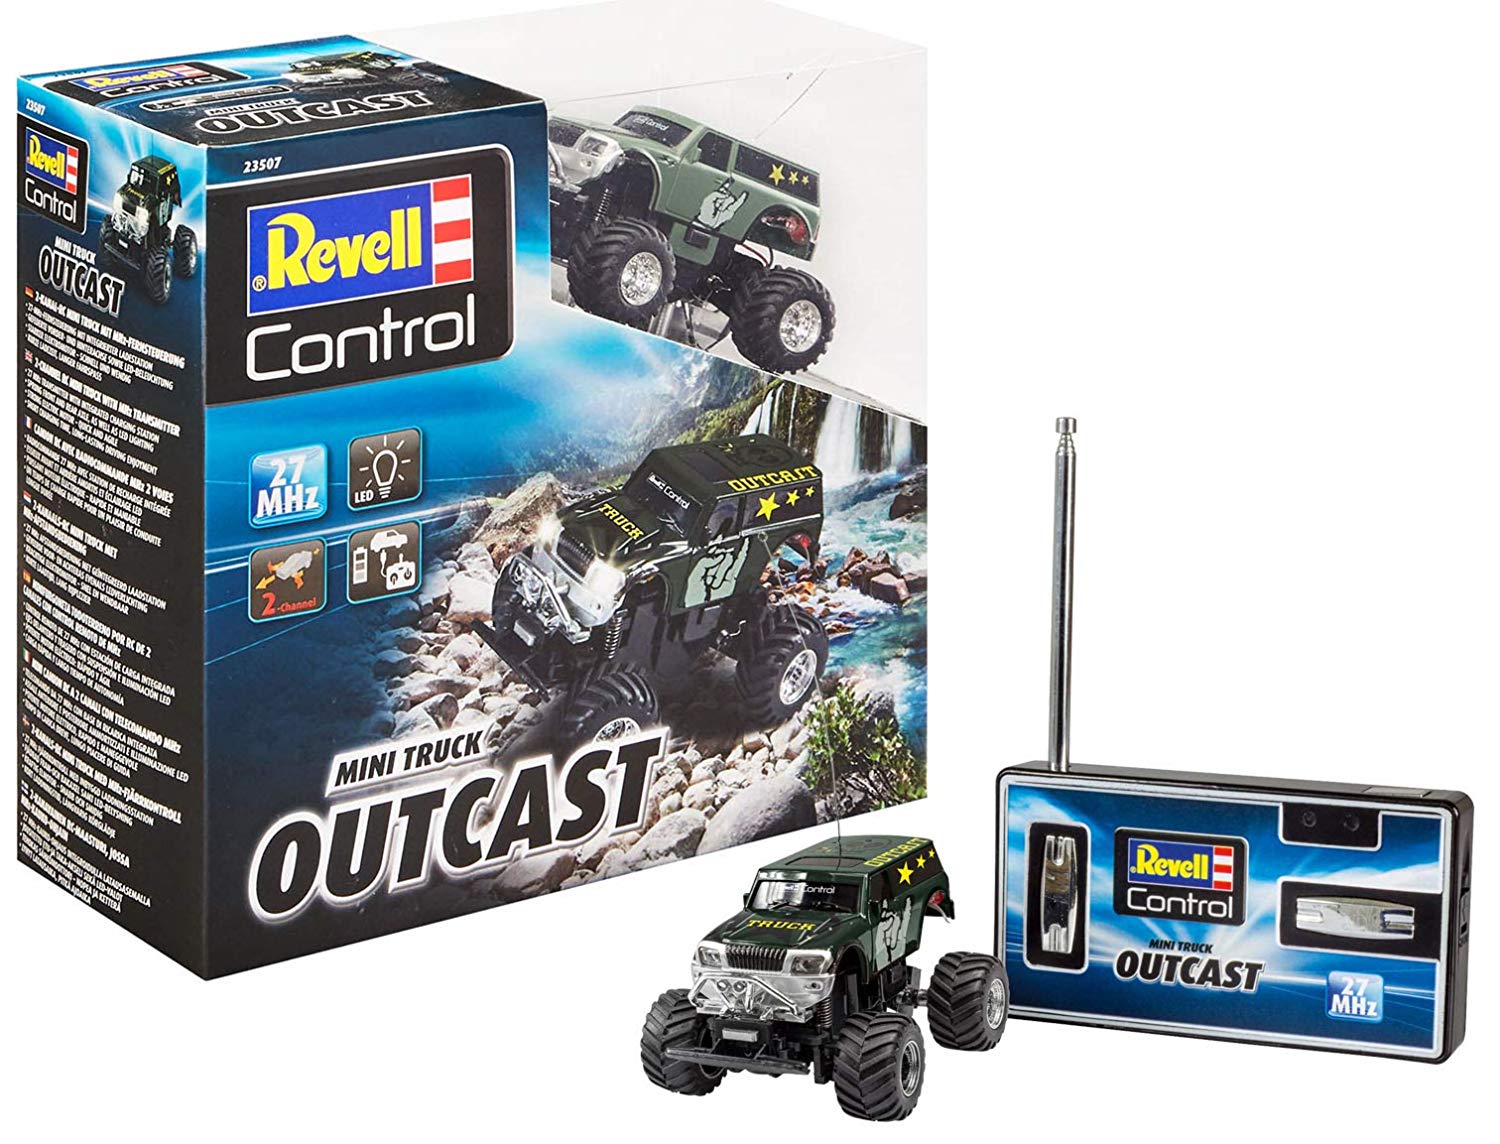 Revell Truck Outcast Mhz Rc